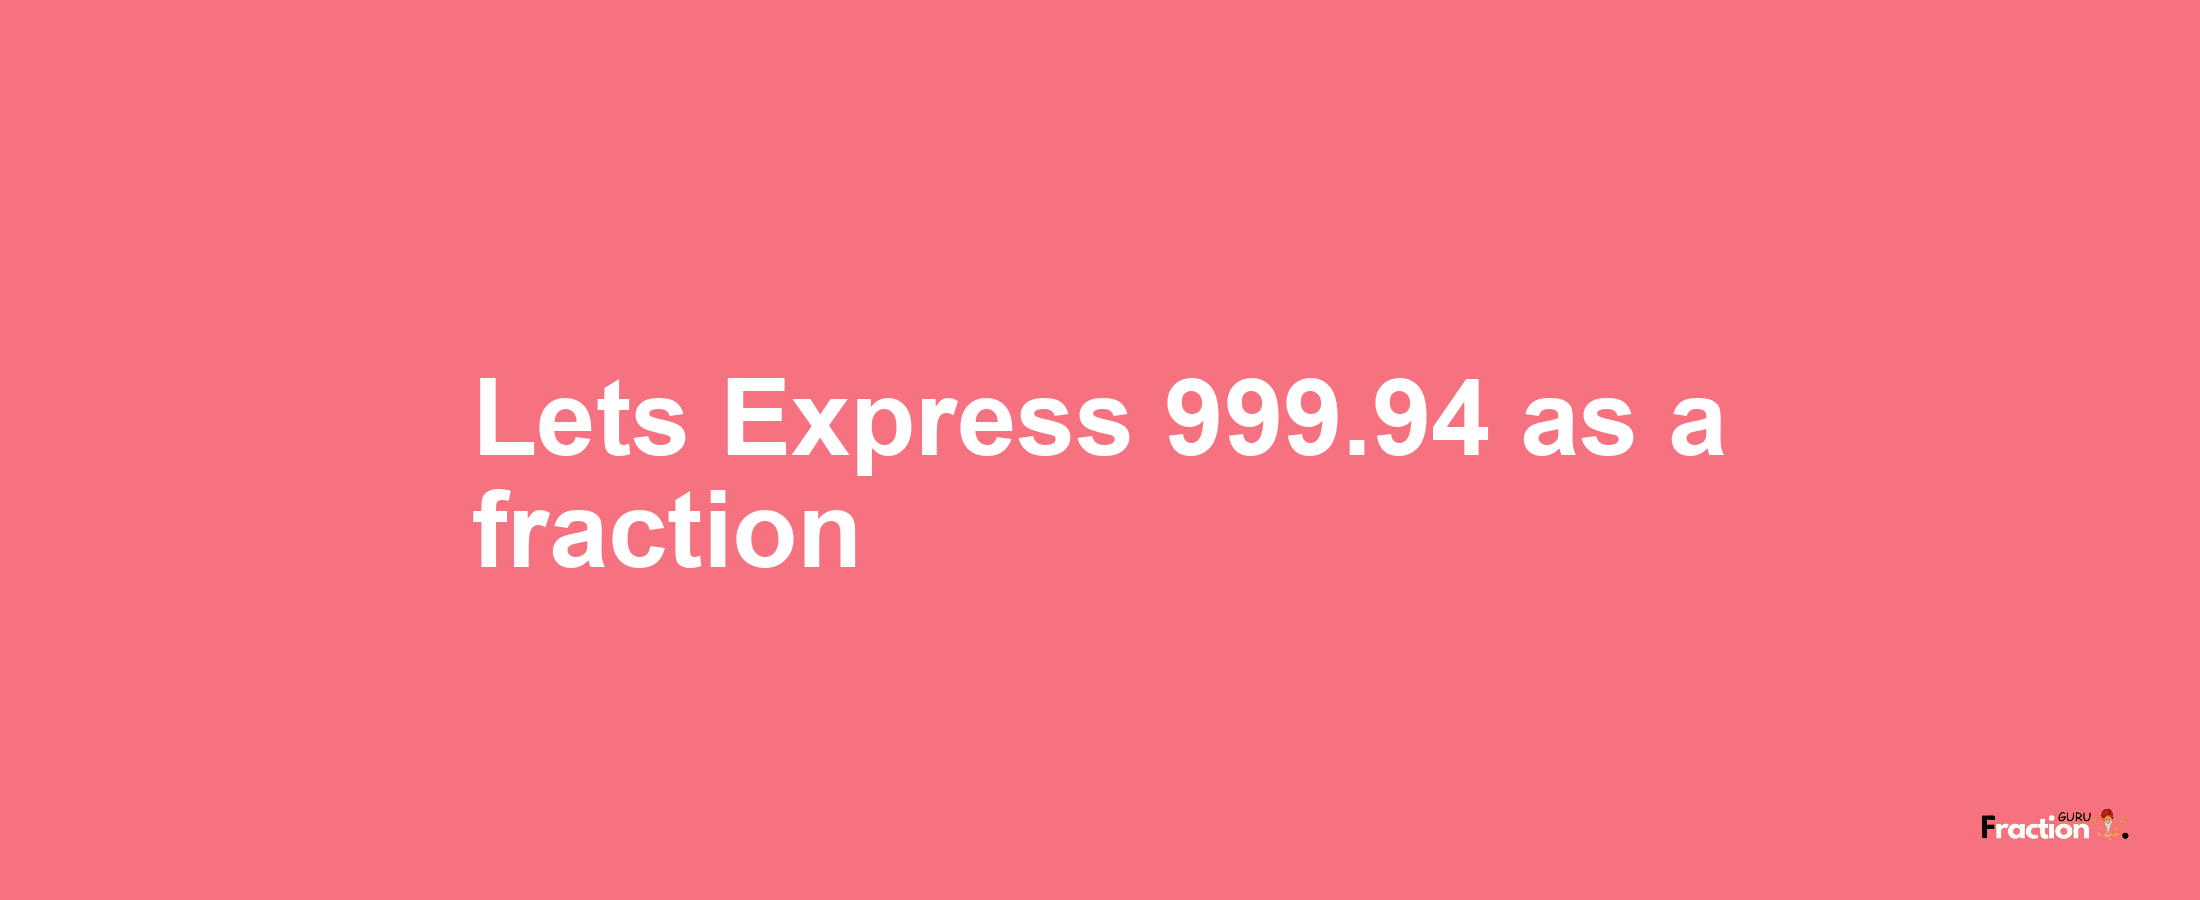 Lets Express 999.94 as afraction